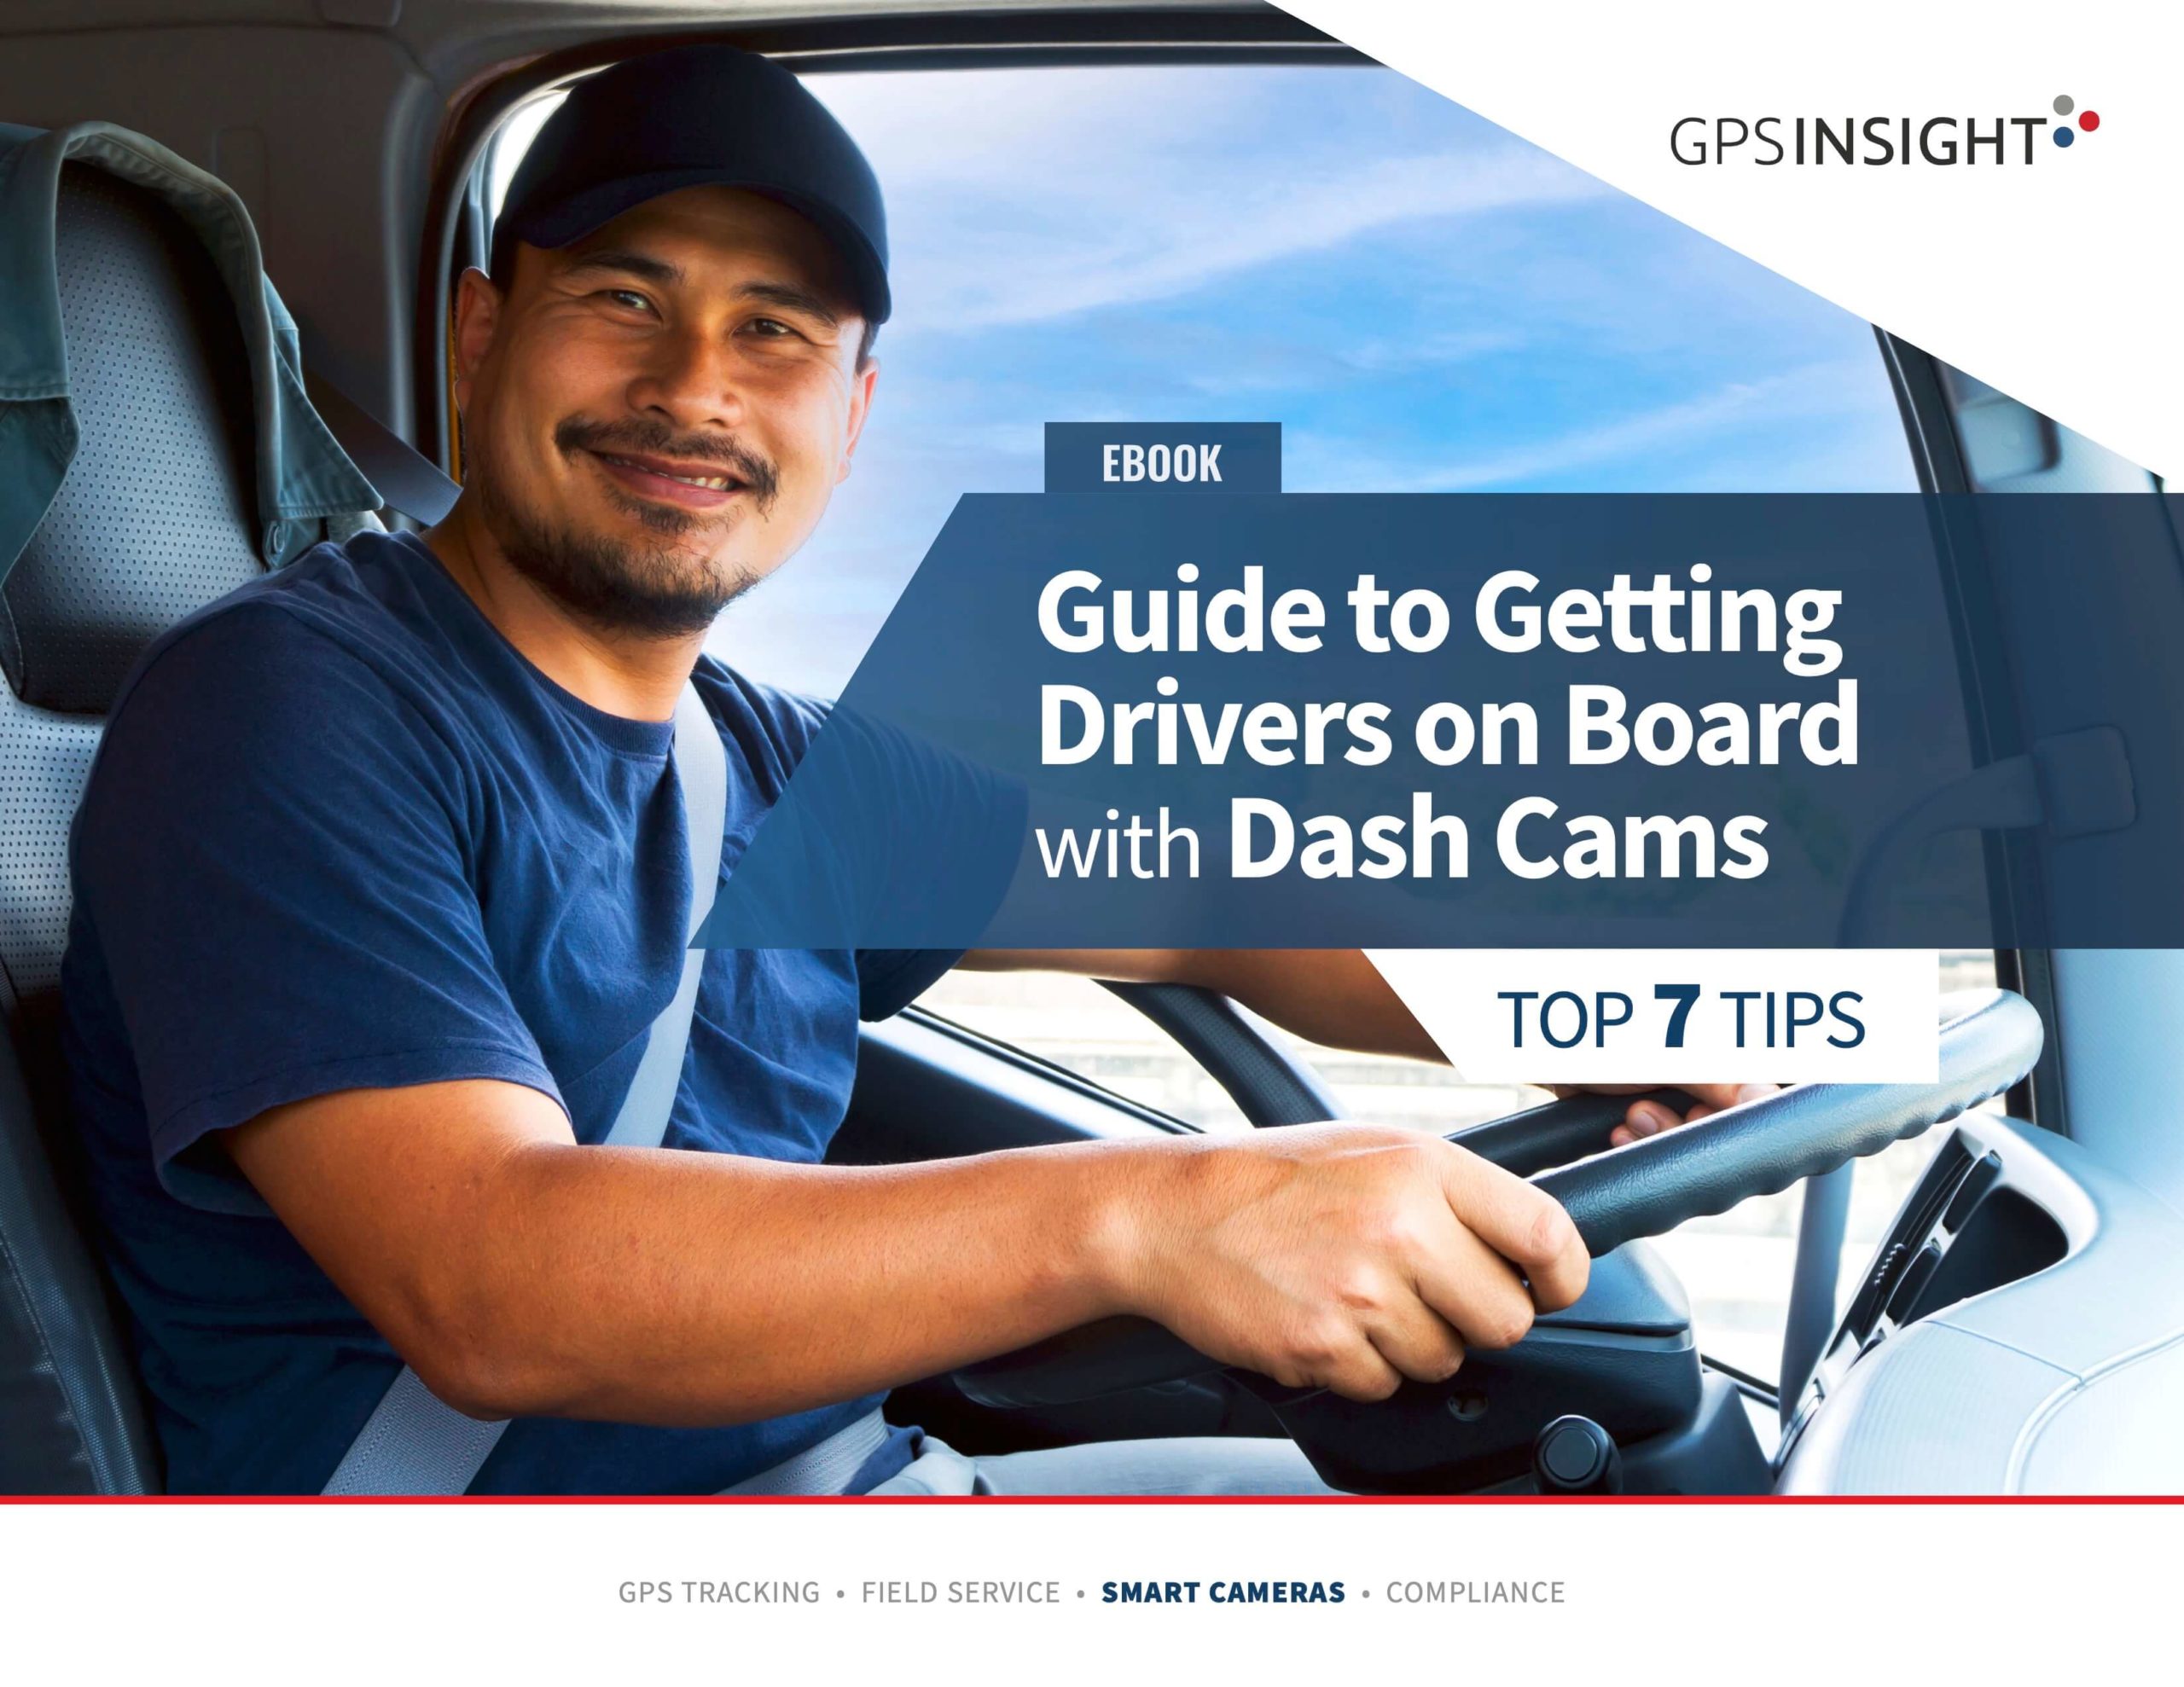 GPS Insight Dash Cams Top 7 Tips scaled